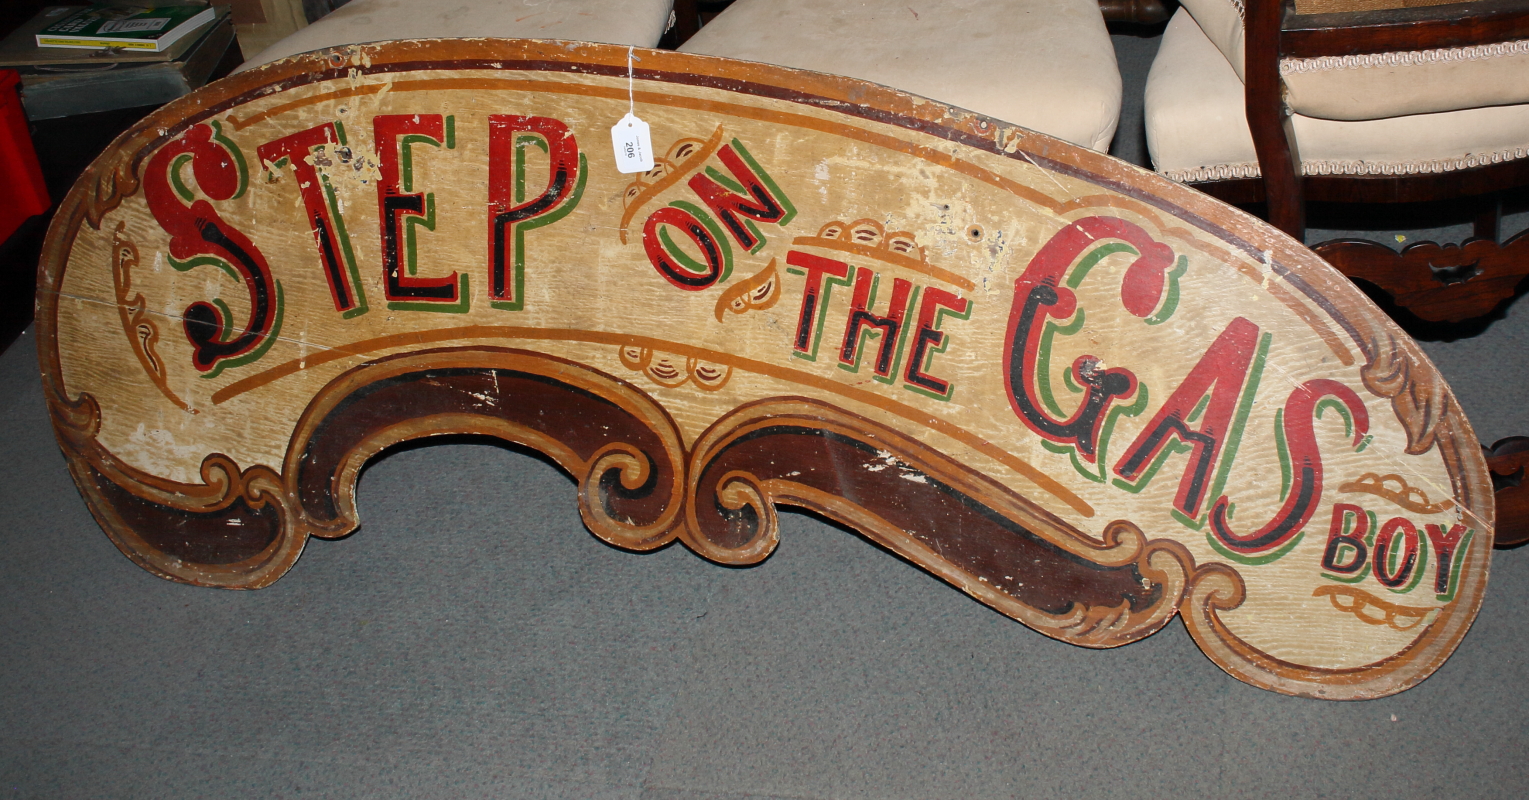 A double-sided fairground sign, "Step on the Gas" and "There's no Limit" verso, 58" long - Image 2 of 2